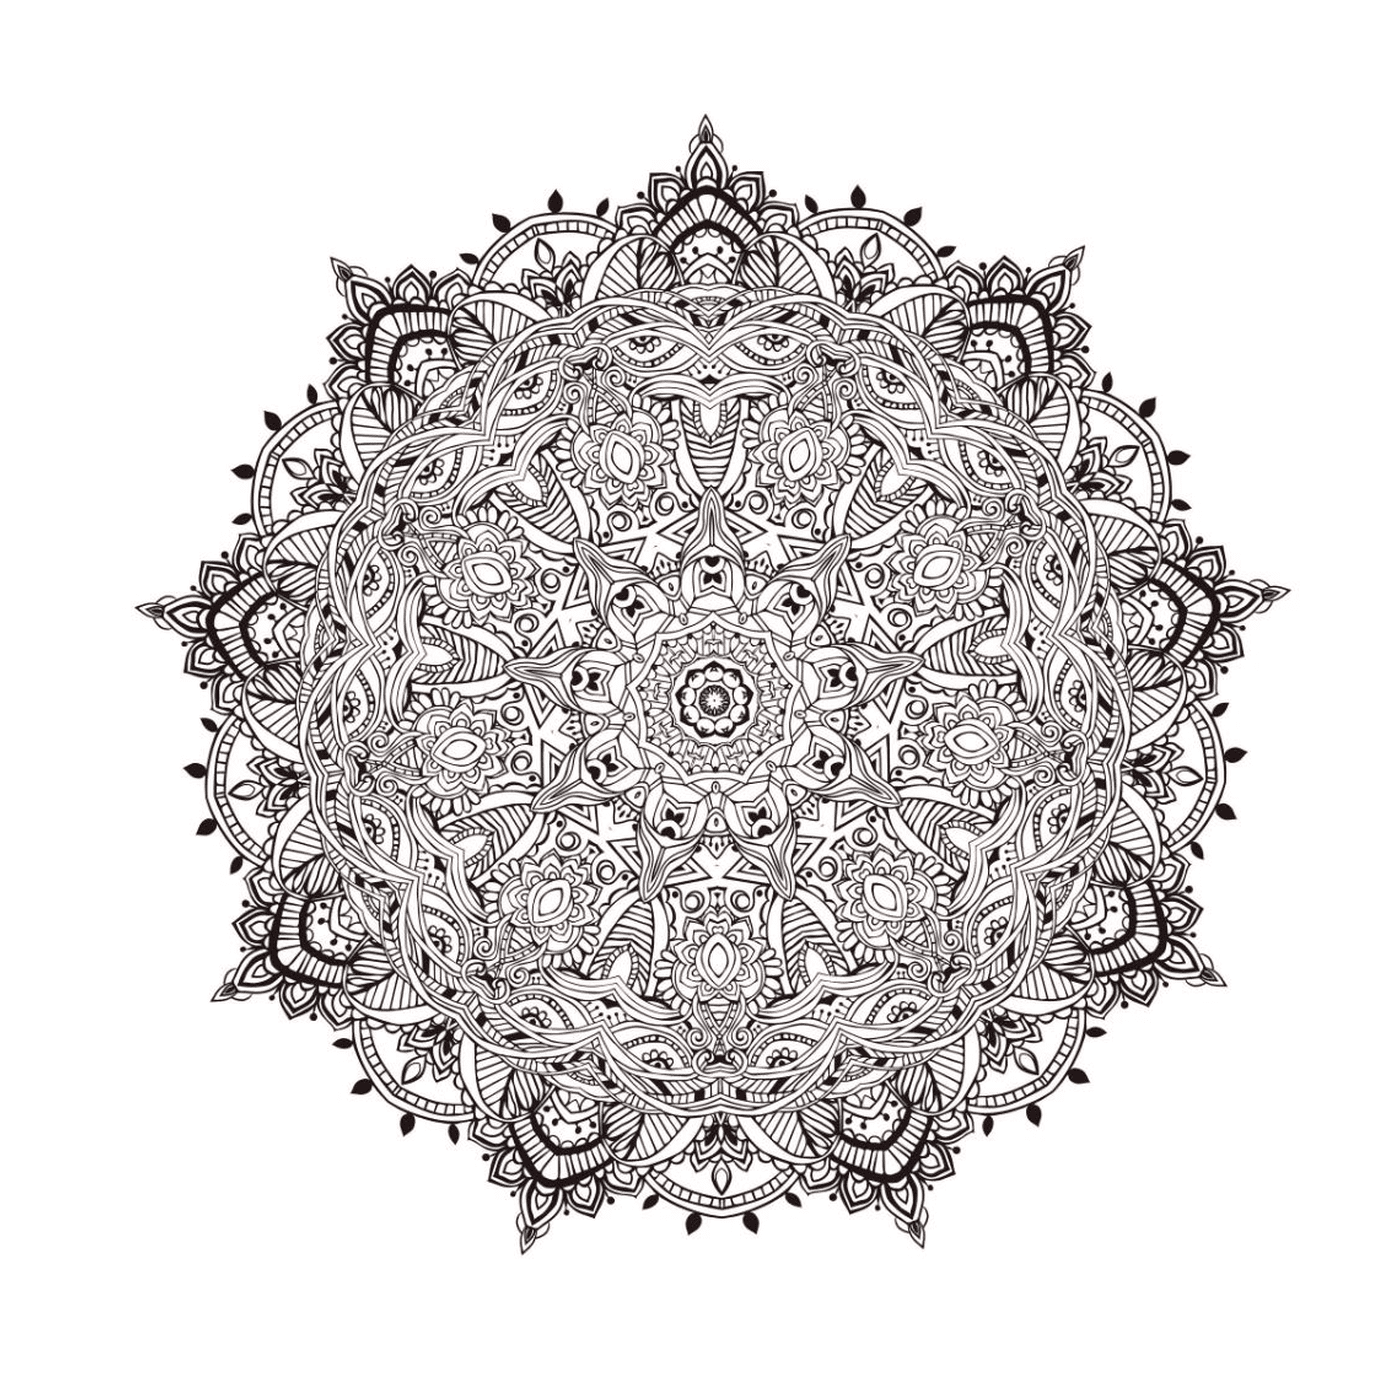  Mandala Stress Reliever for Adults 2017 